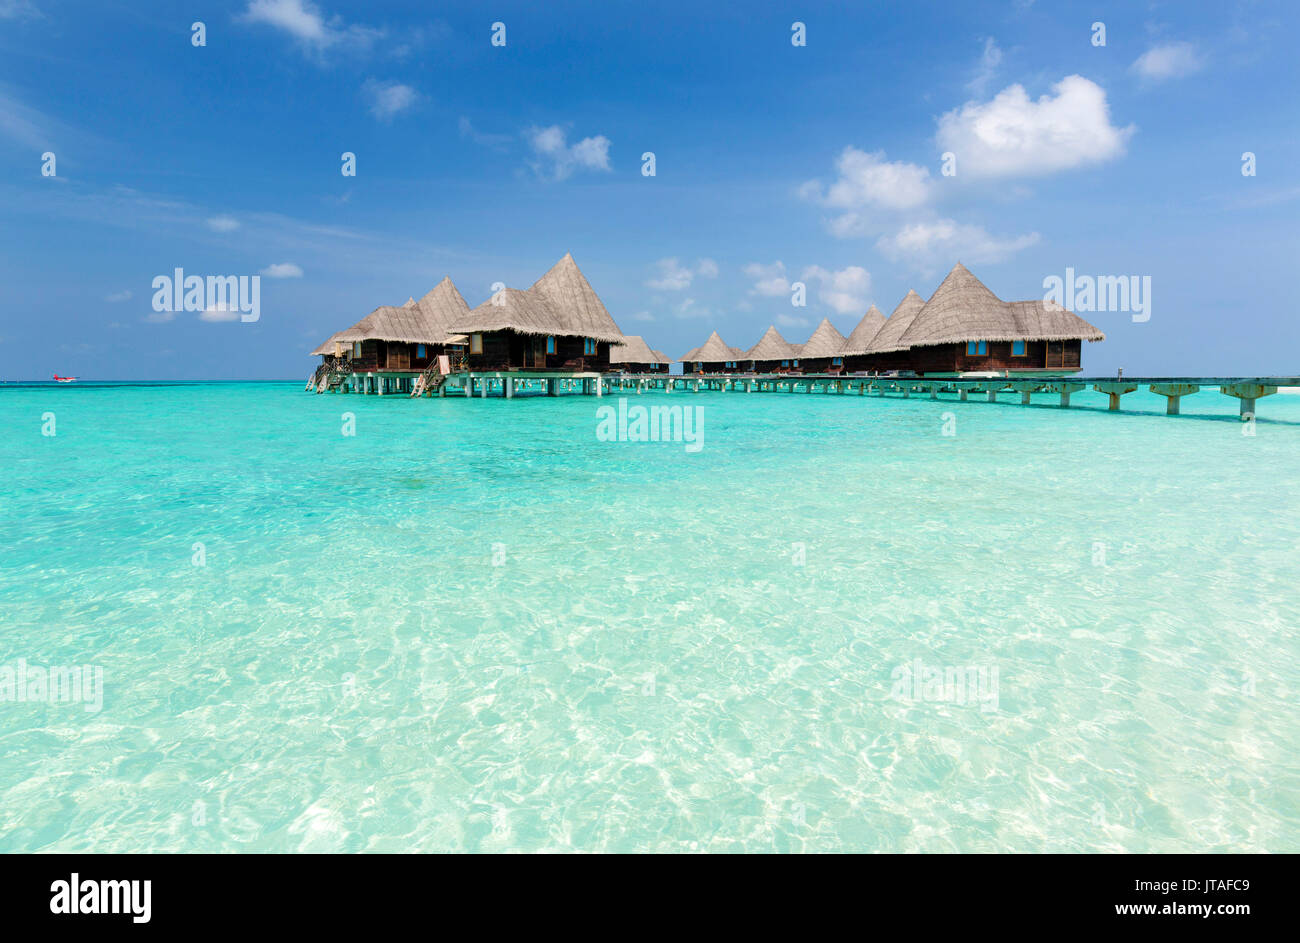 Clear sea, blue sky and over-water villas, Coco Palm Resort, Dhuni Kolhu, Baa Atoll, Republic of Maldives, Indian Ocean, Asia Stock Photo